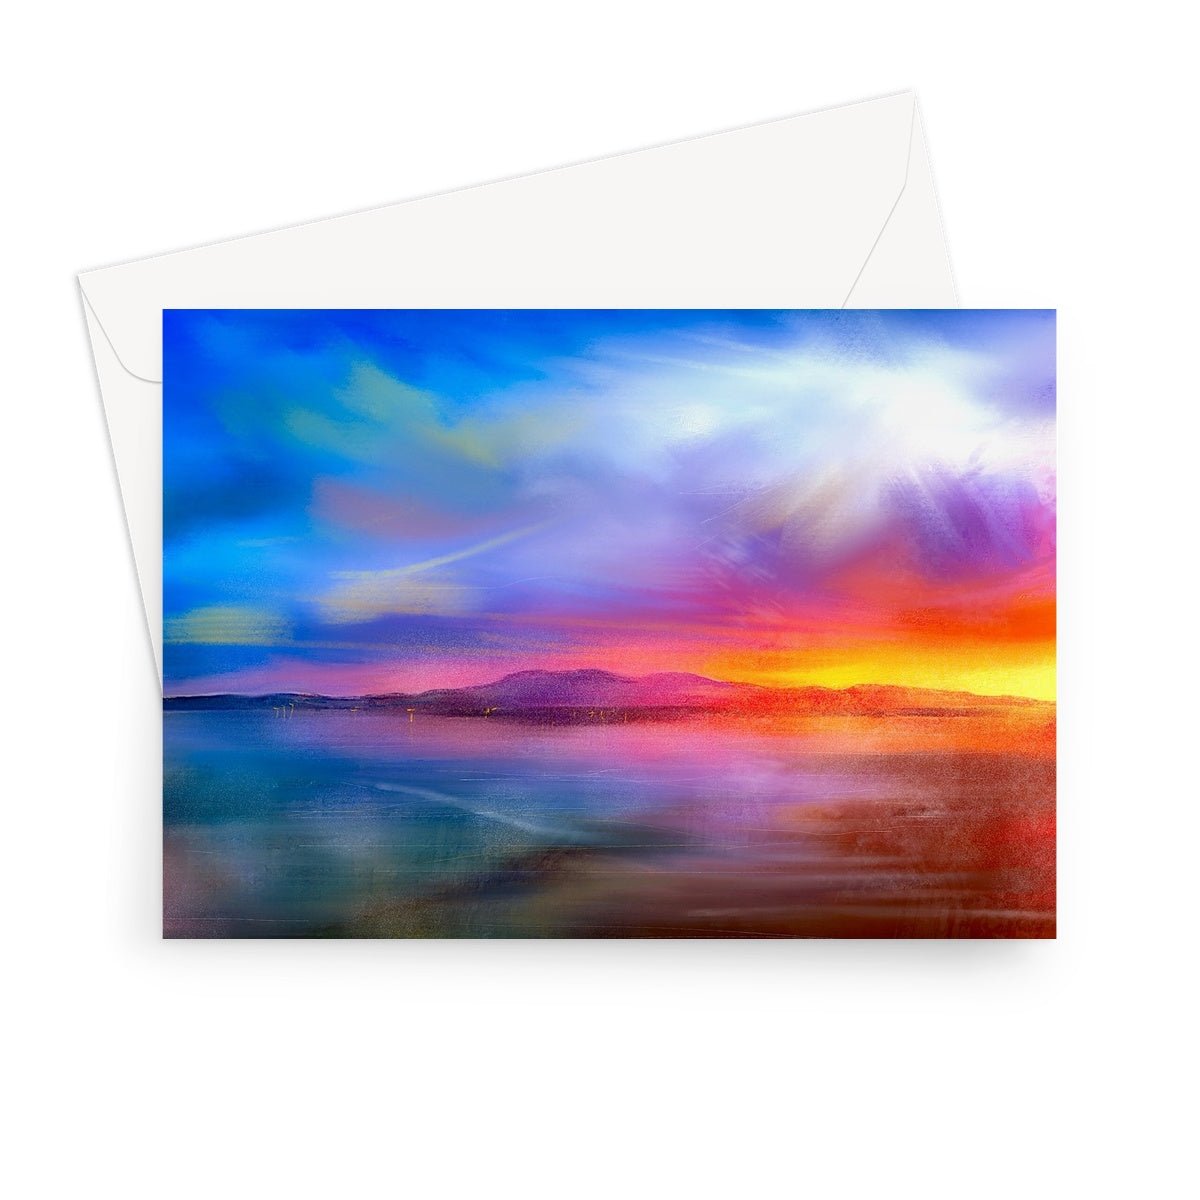 Arran Sunset Art Gift Greeting Card-Greetings Cards-Arran Art Gallery-7"x5"-1 Card-Paintings, Prints, Homeware, Art Gifts From Scotland By Scottish Artist Kevin Hunter